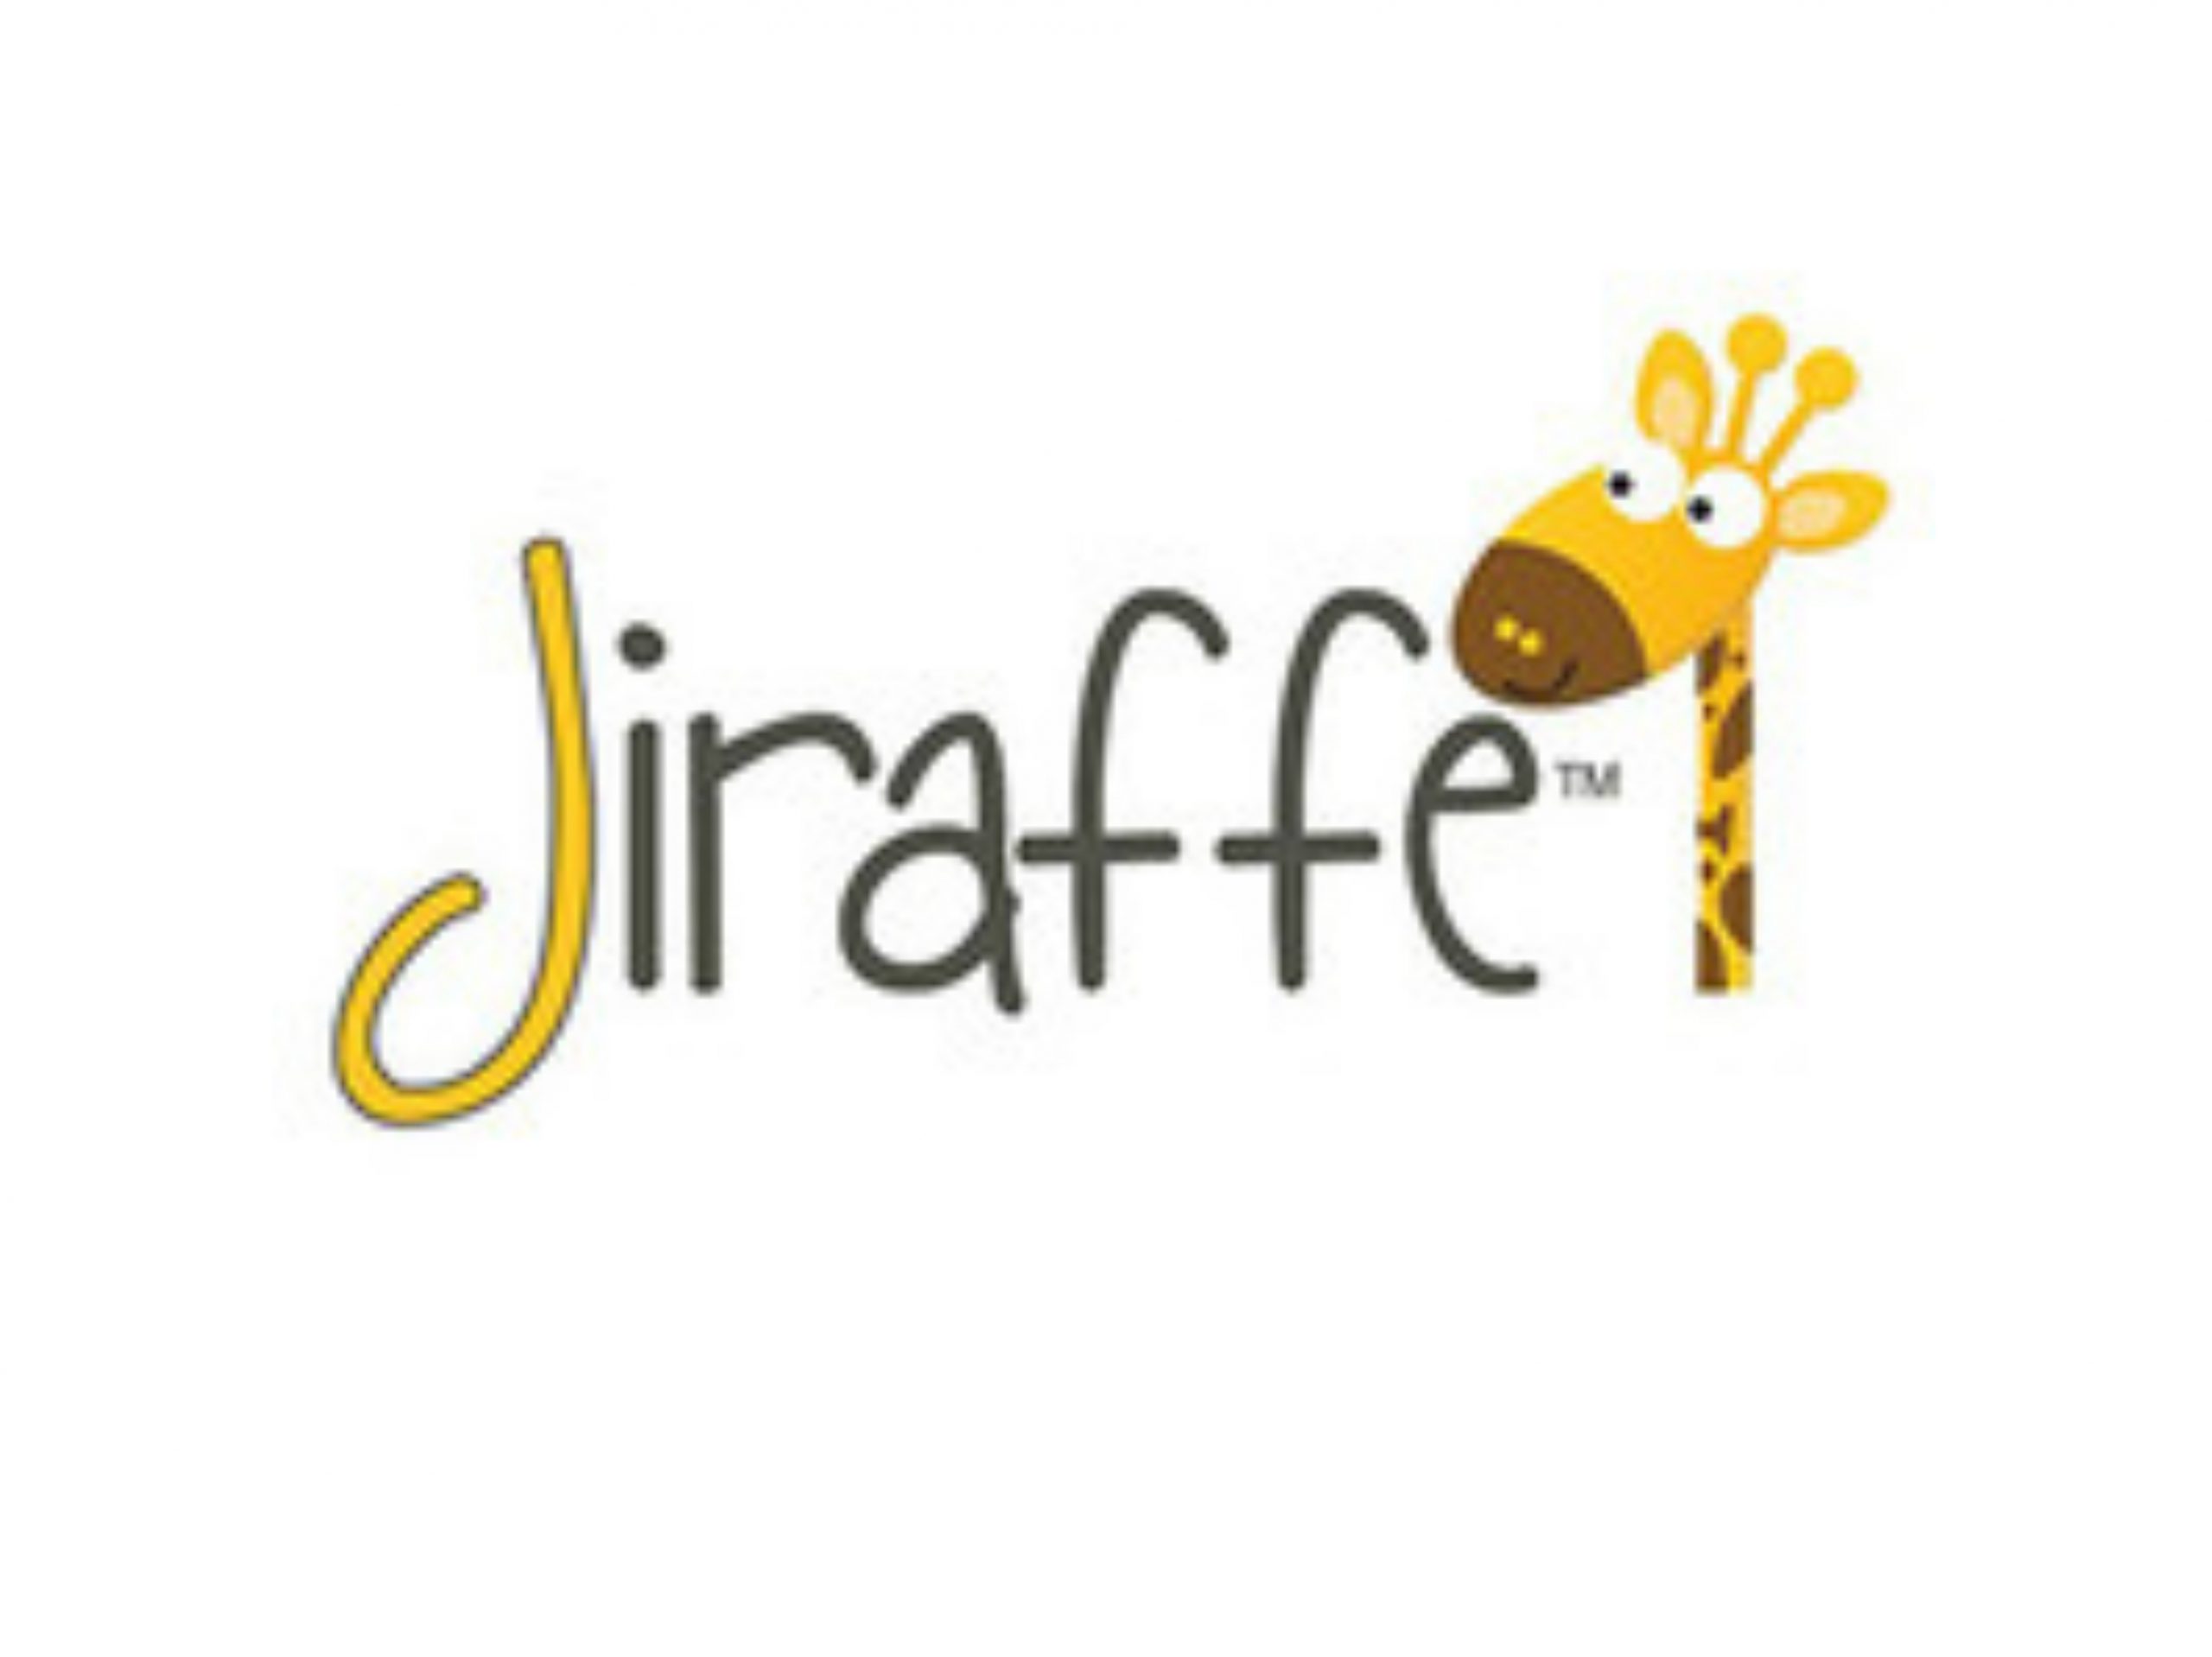 Jiraffe offer Face to Face Appointments during Covid-19